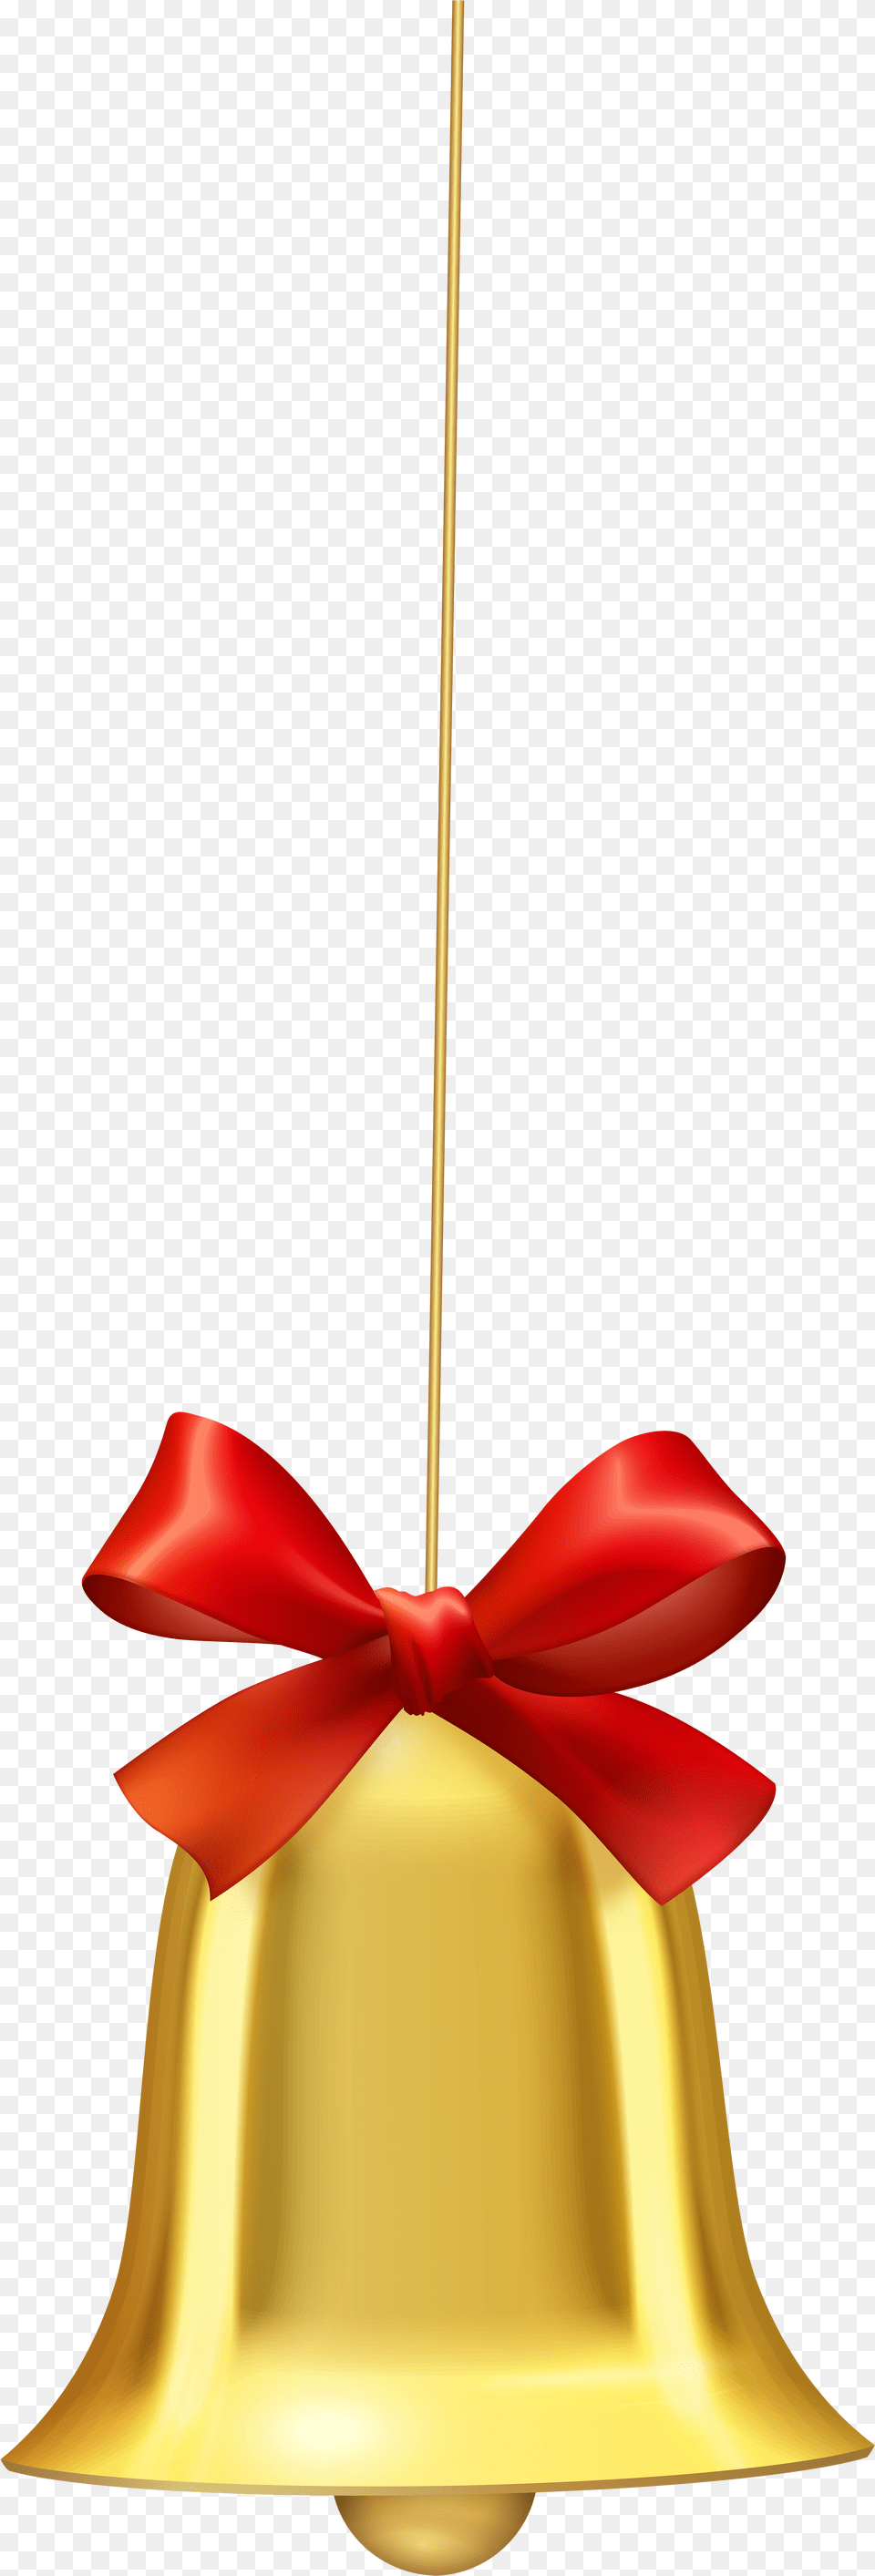 Hd Christmas Bell Hanging Hanging Christmas Bells Free Png Download